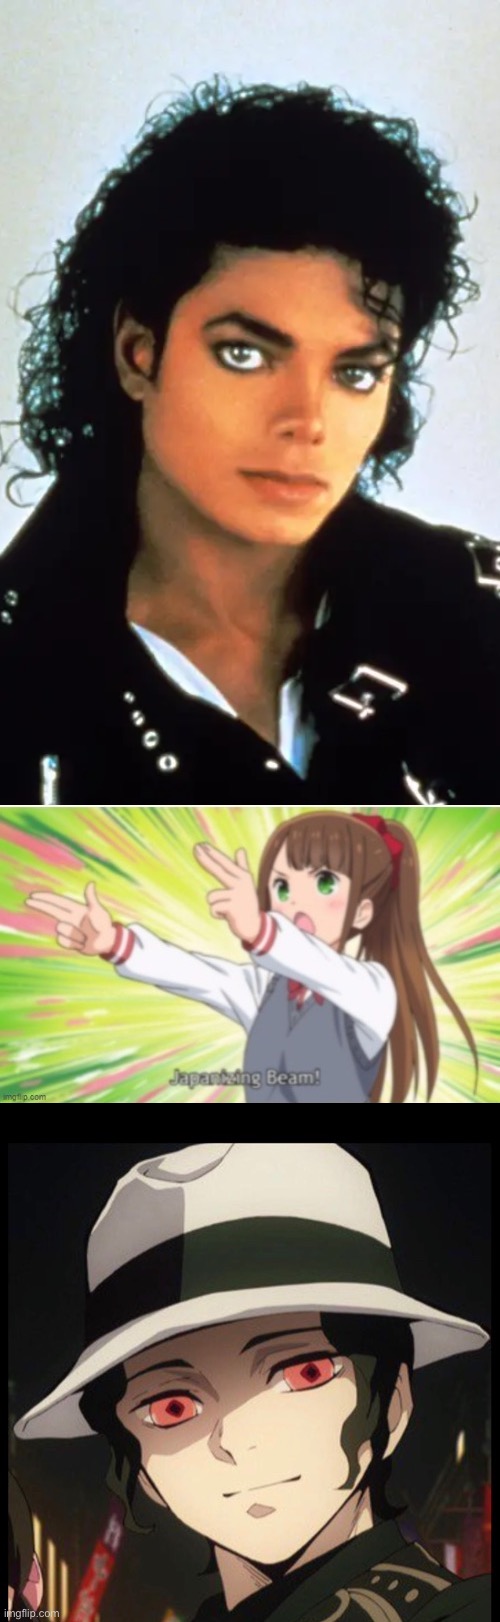 Michael Jackson in anime form | image tagged in michael jackson,anime,japanizing beam | made w/ Imgflip meme maker